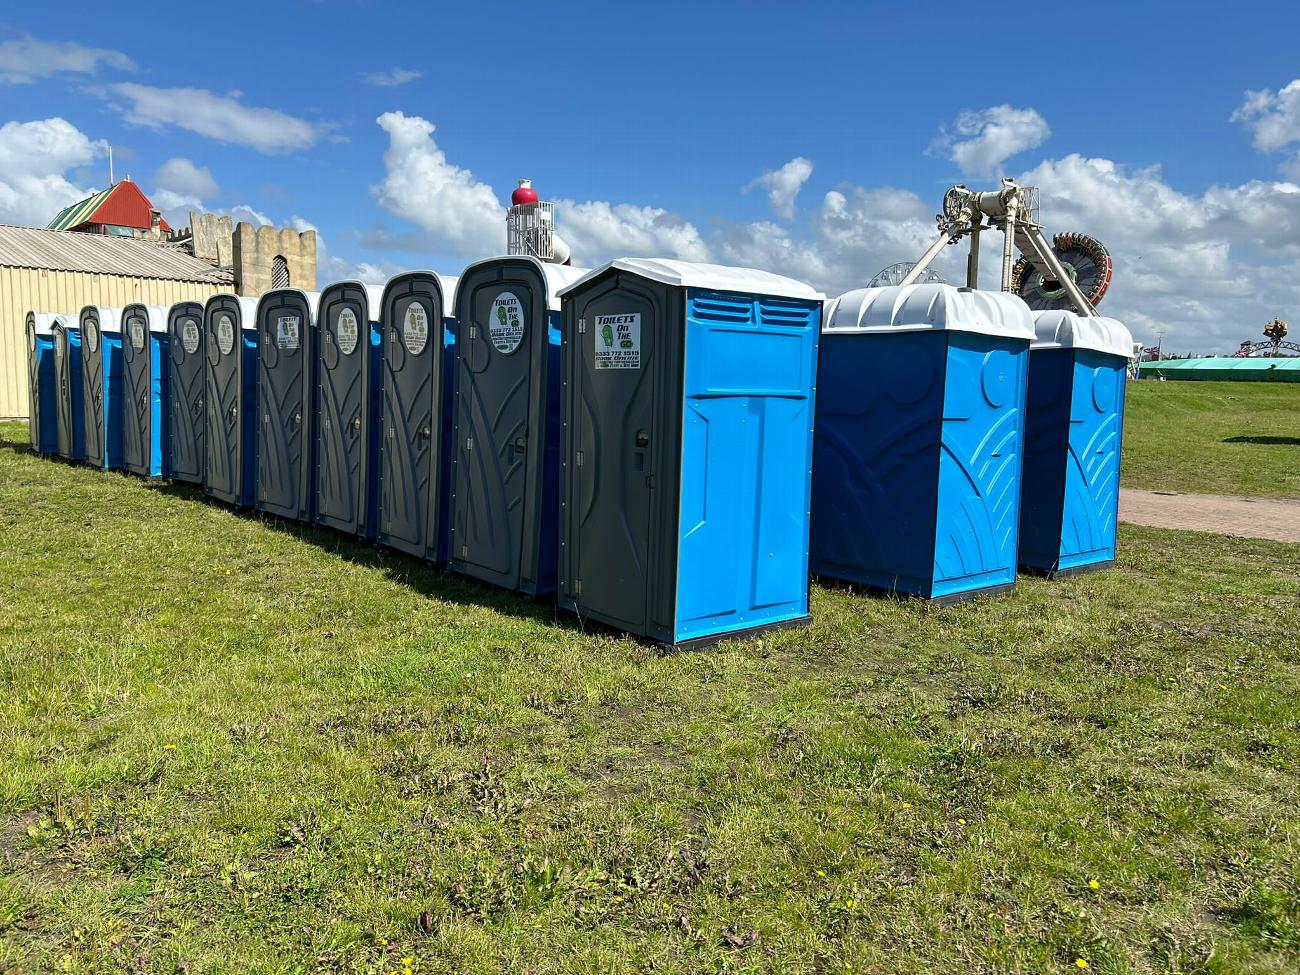 Gallery | Portable Toilet Loo Hire Rental Company in North West uk and Manchester gallery image 55